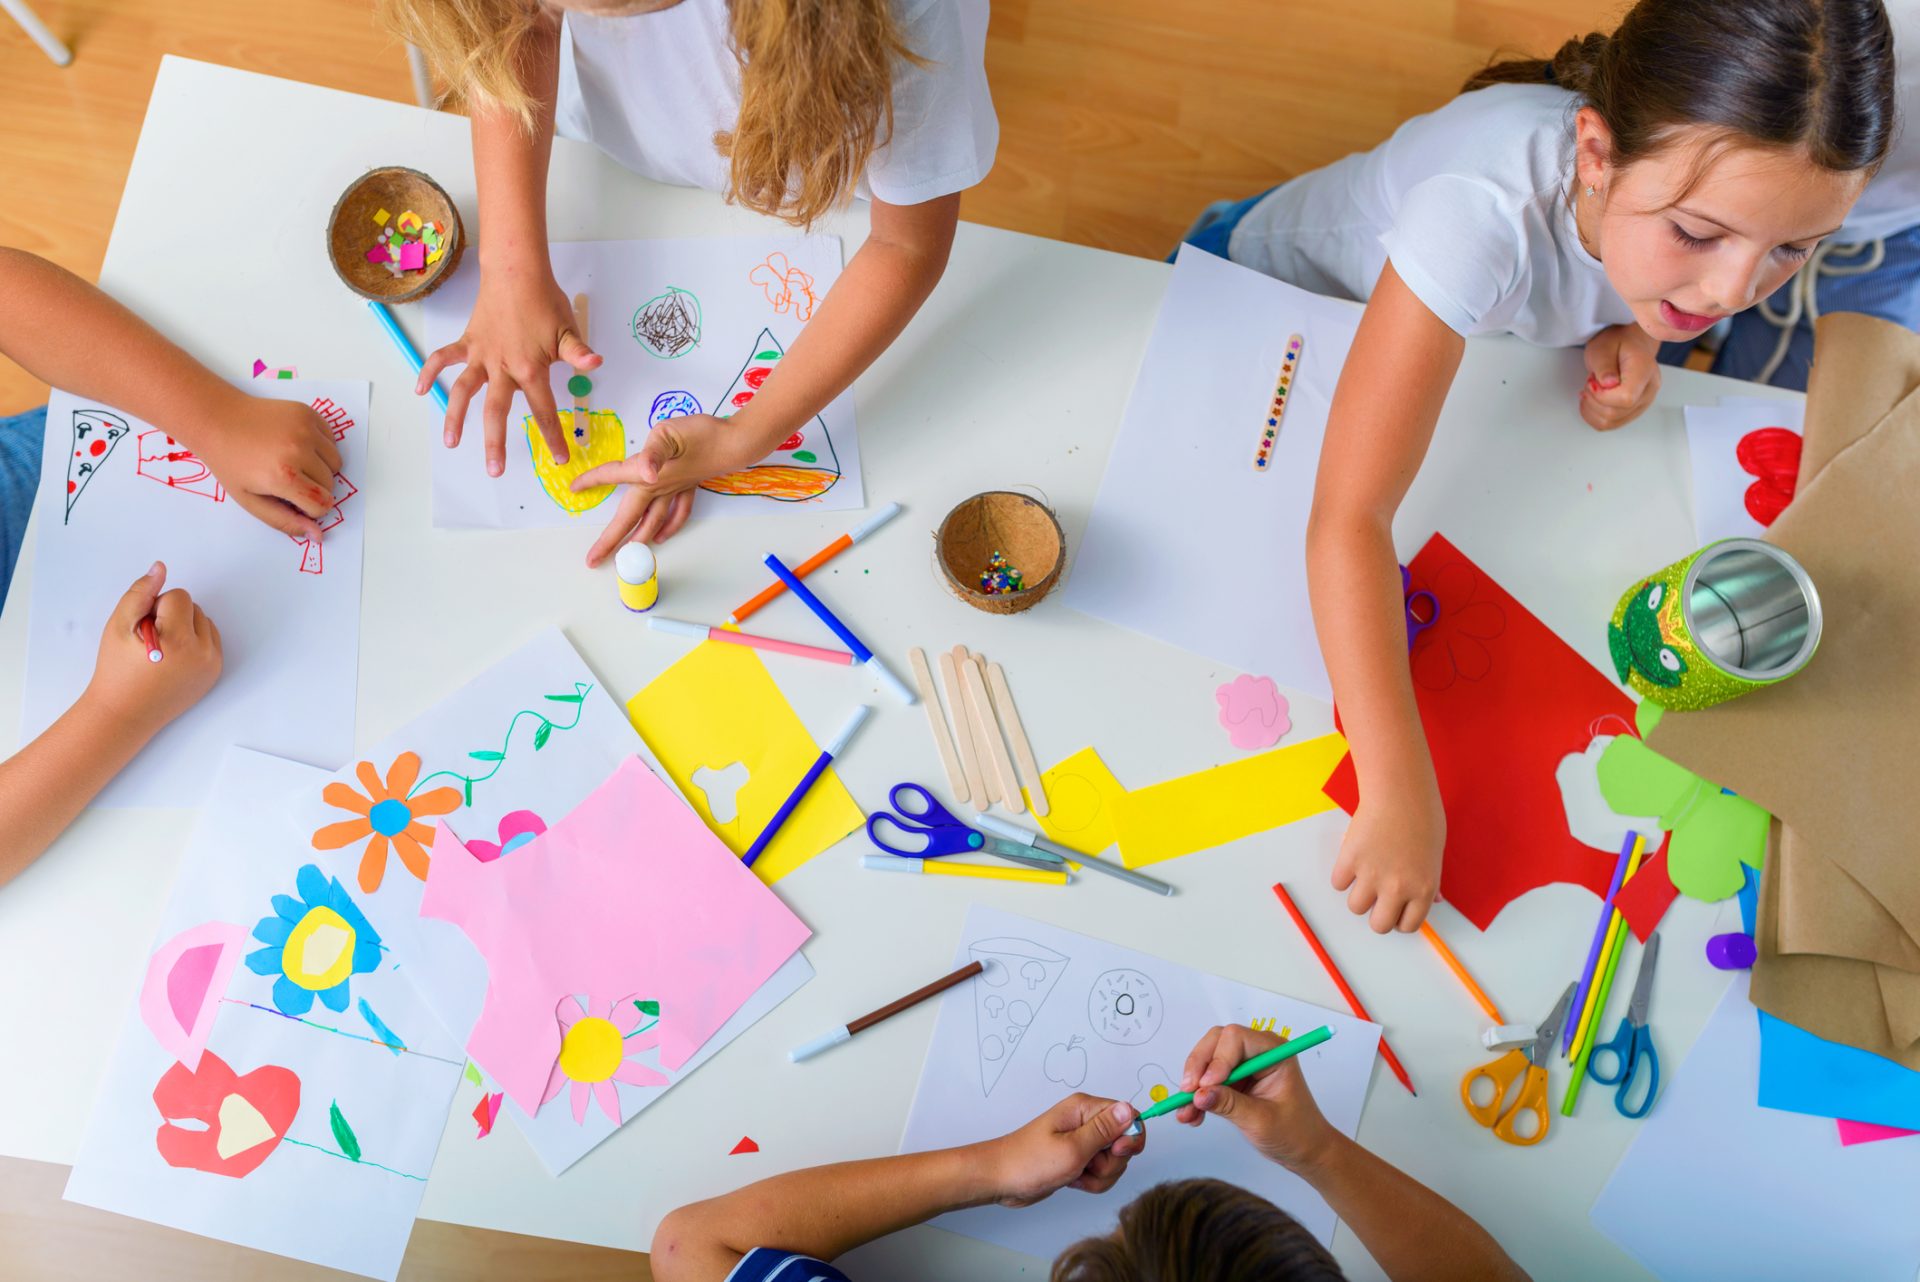 the arms of four children can be seen from above who are using art materials to draw pictures